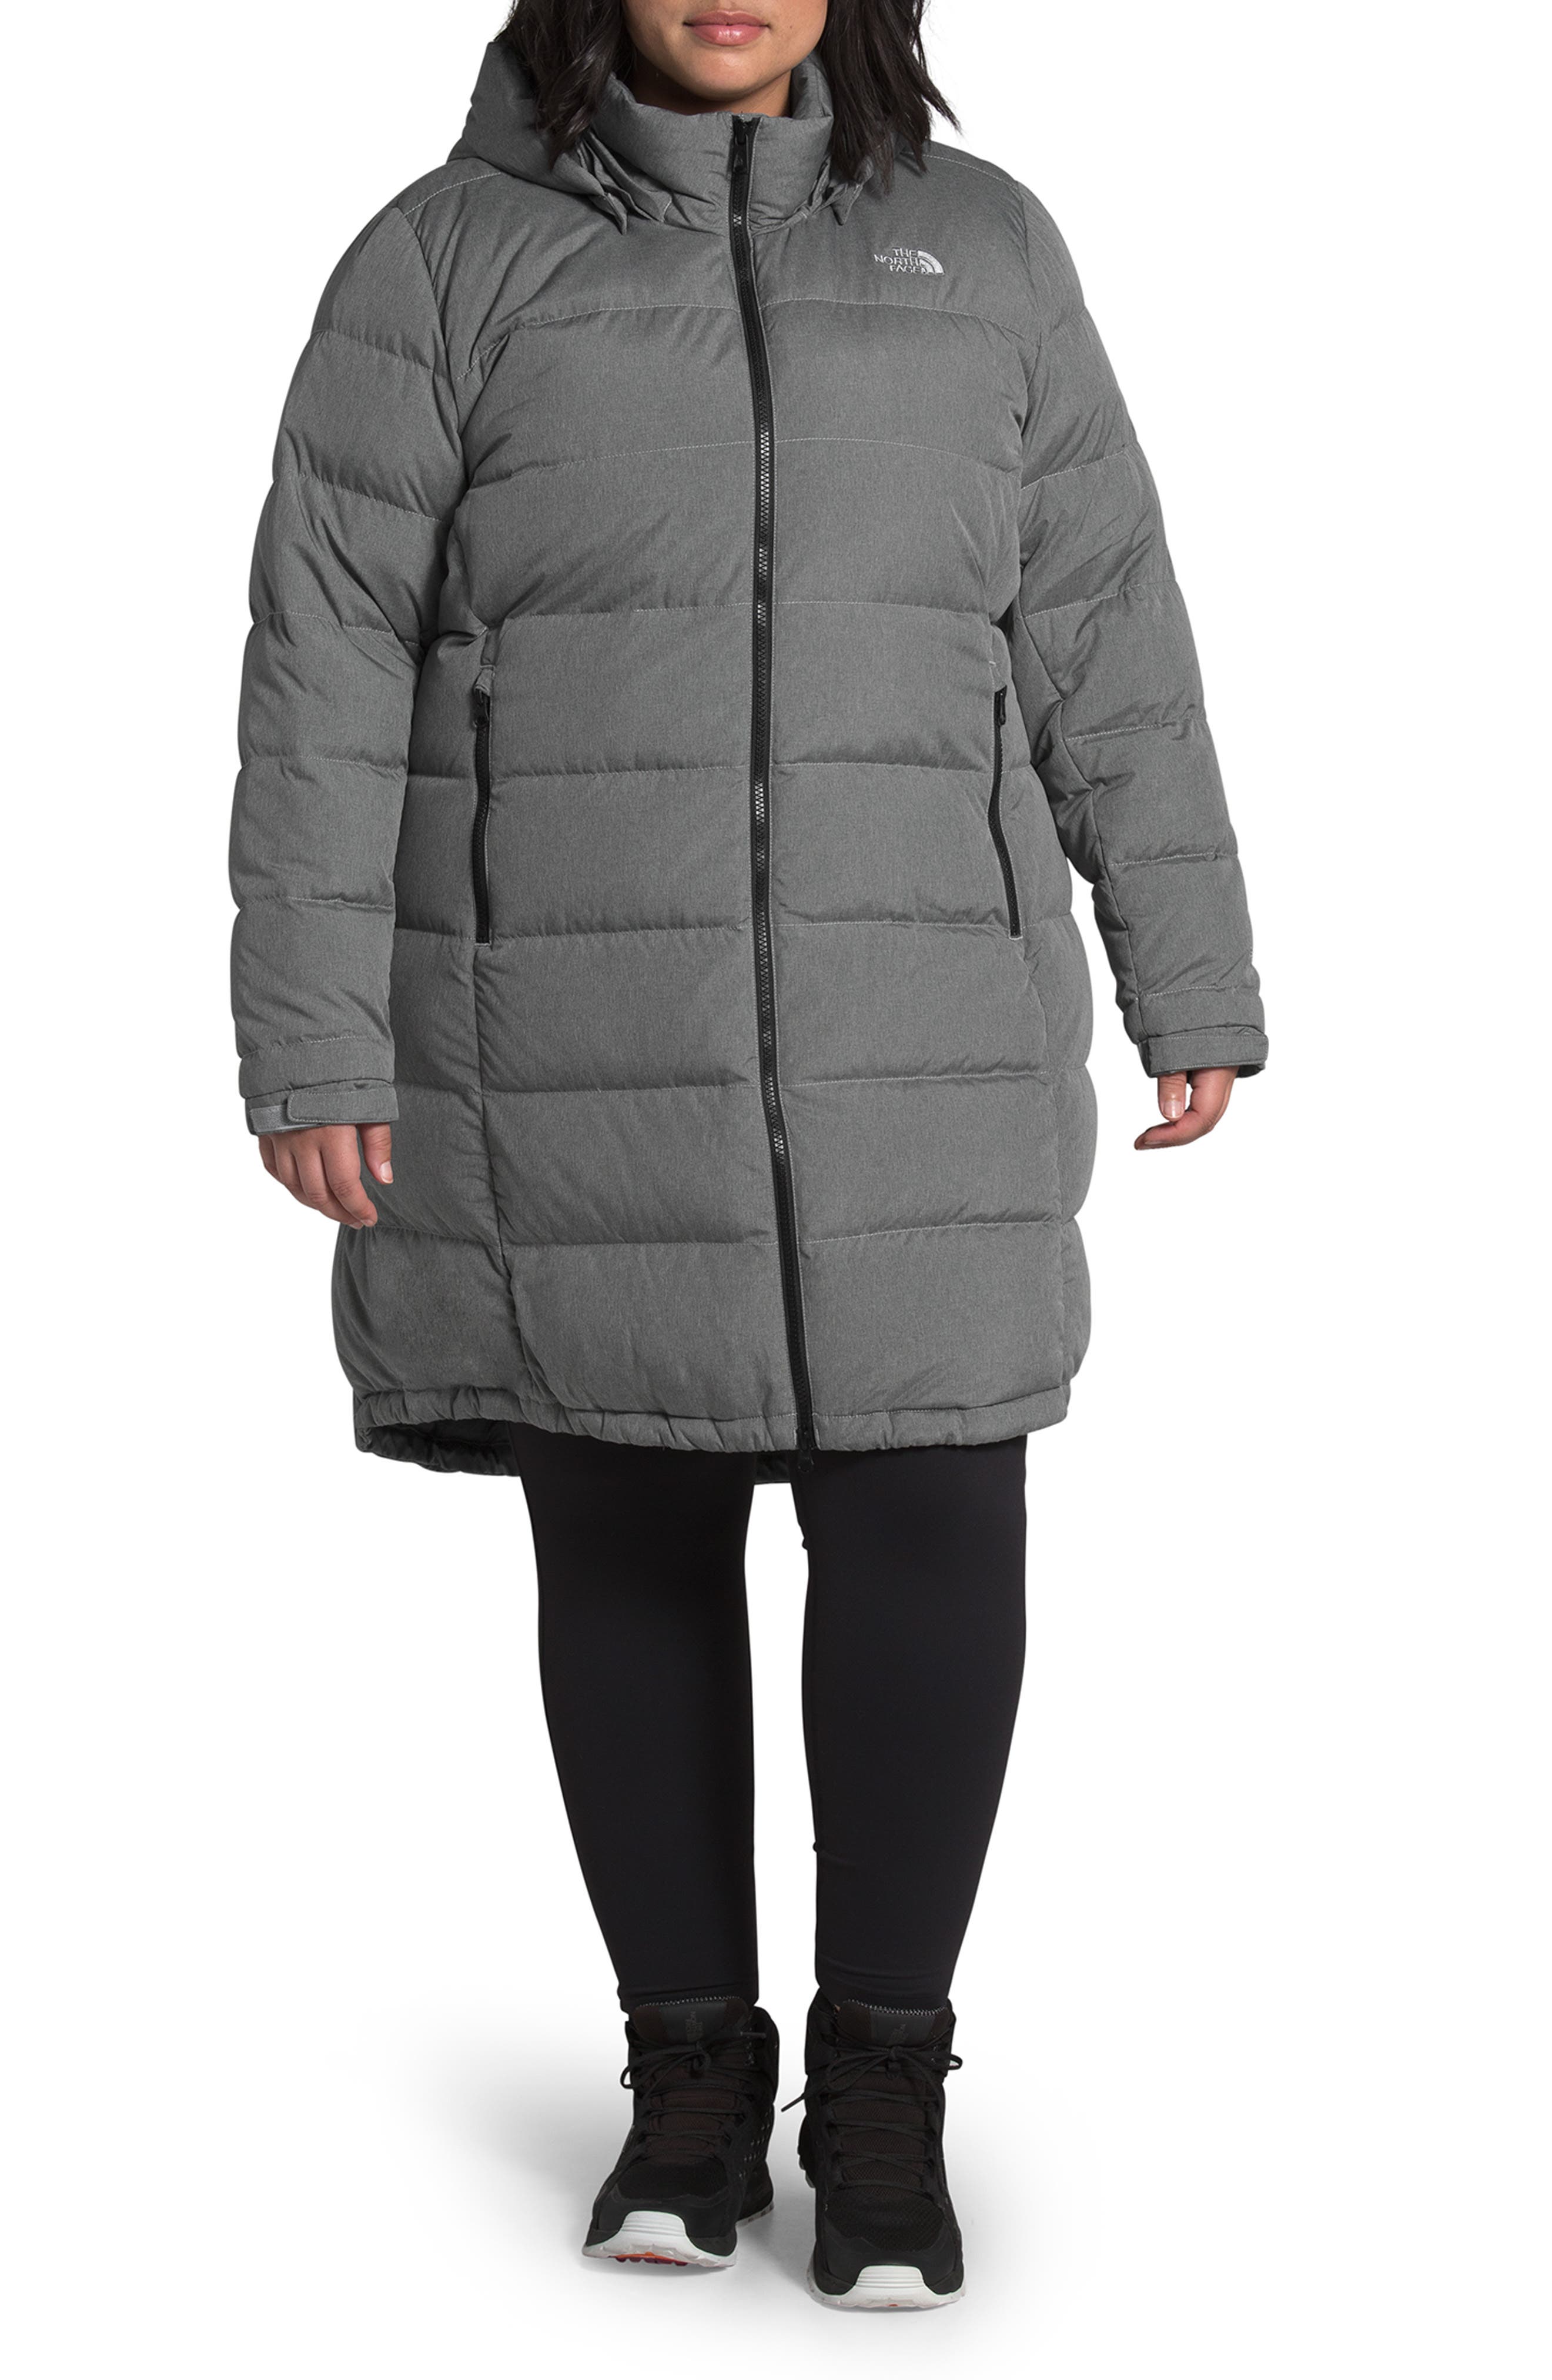 north face plus size jackets 